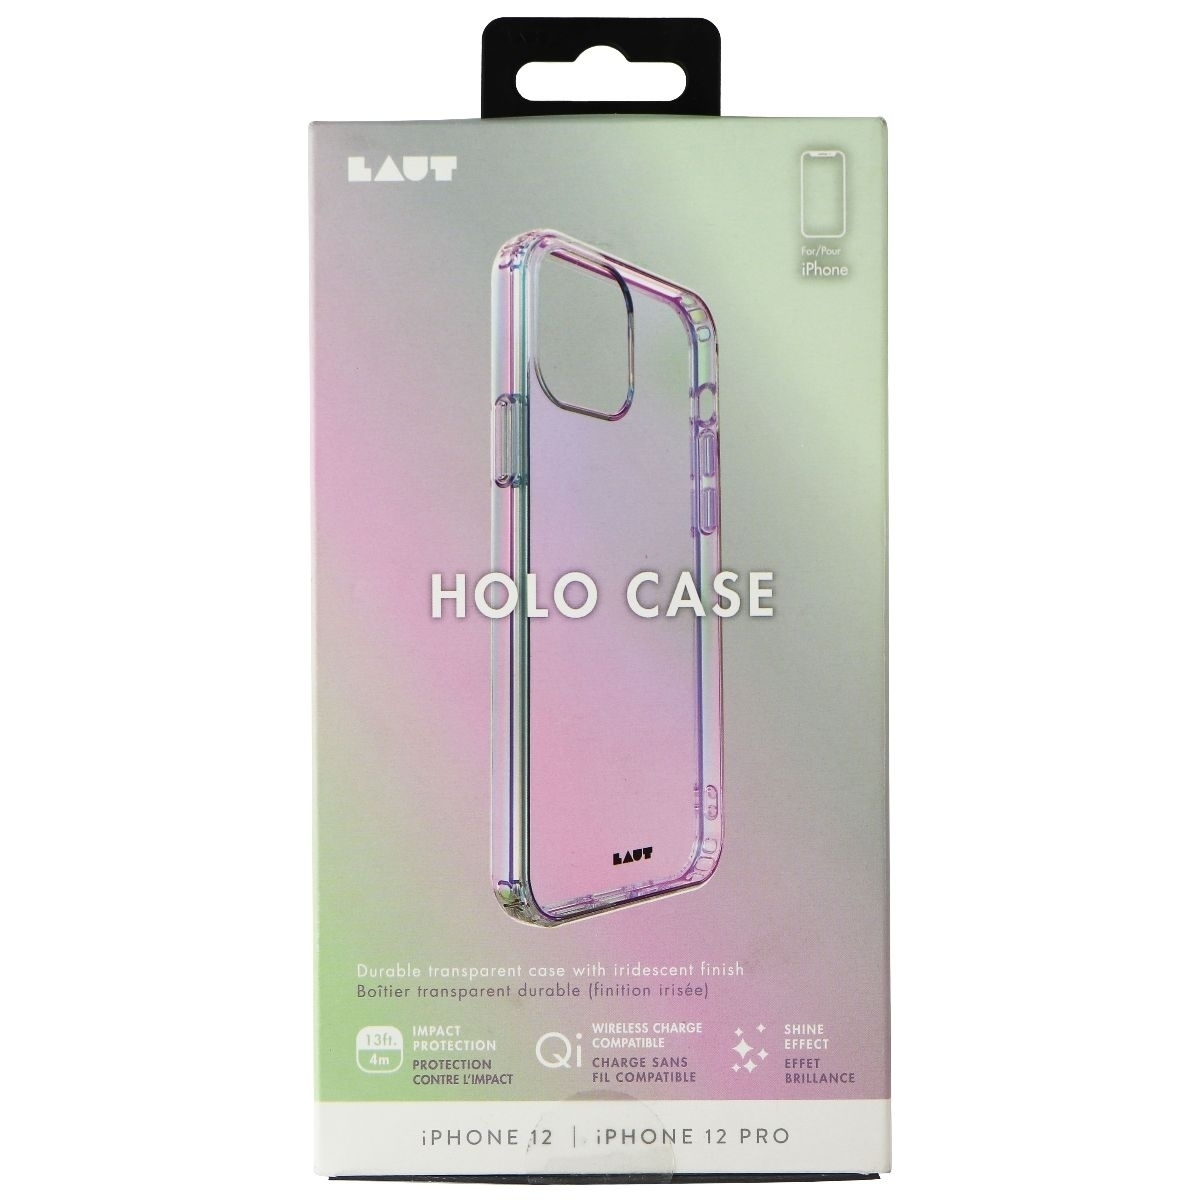 LAUT Holo Series Case For Apple IPhone 12 And IPhone 12 Pro - Pearl